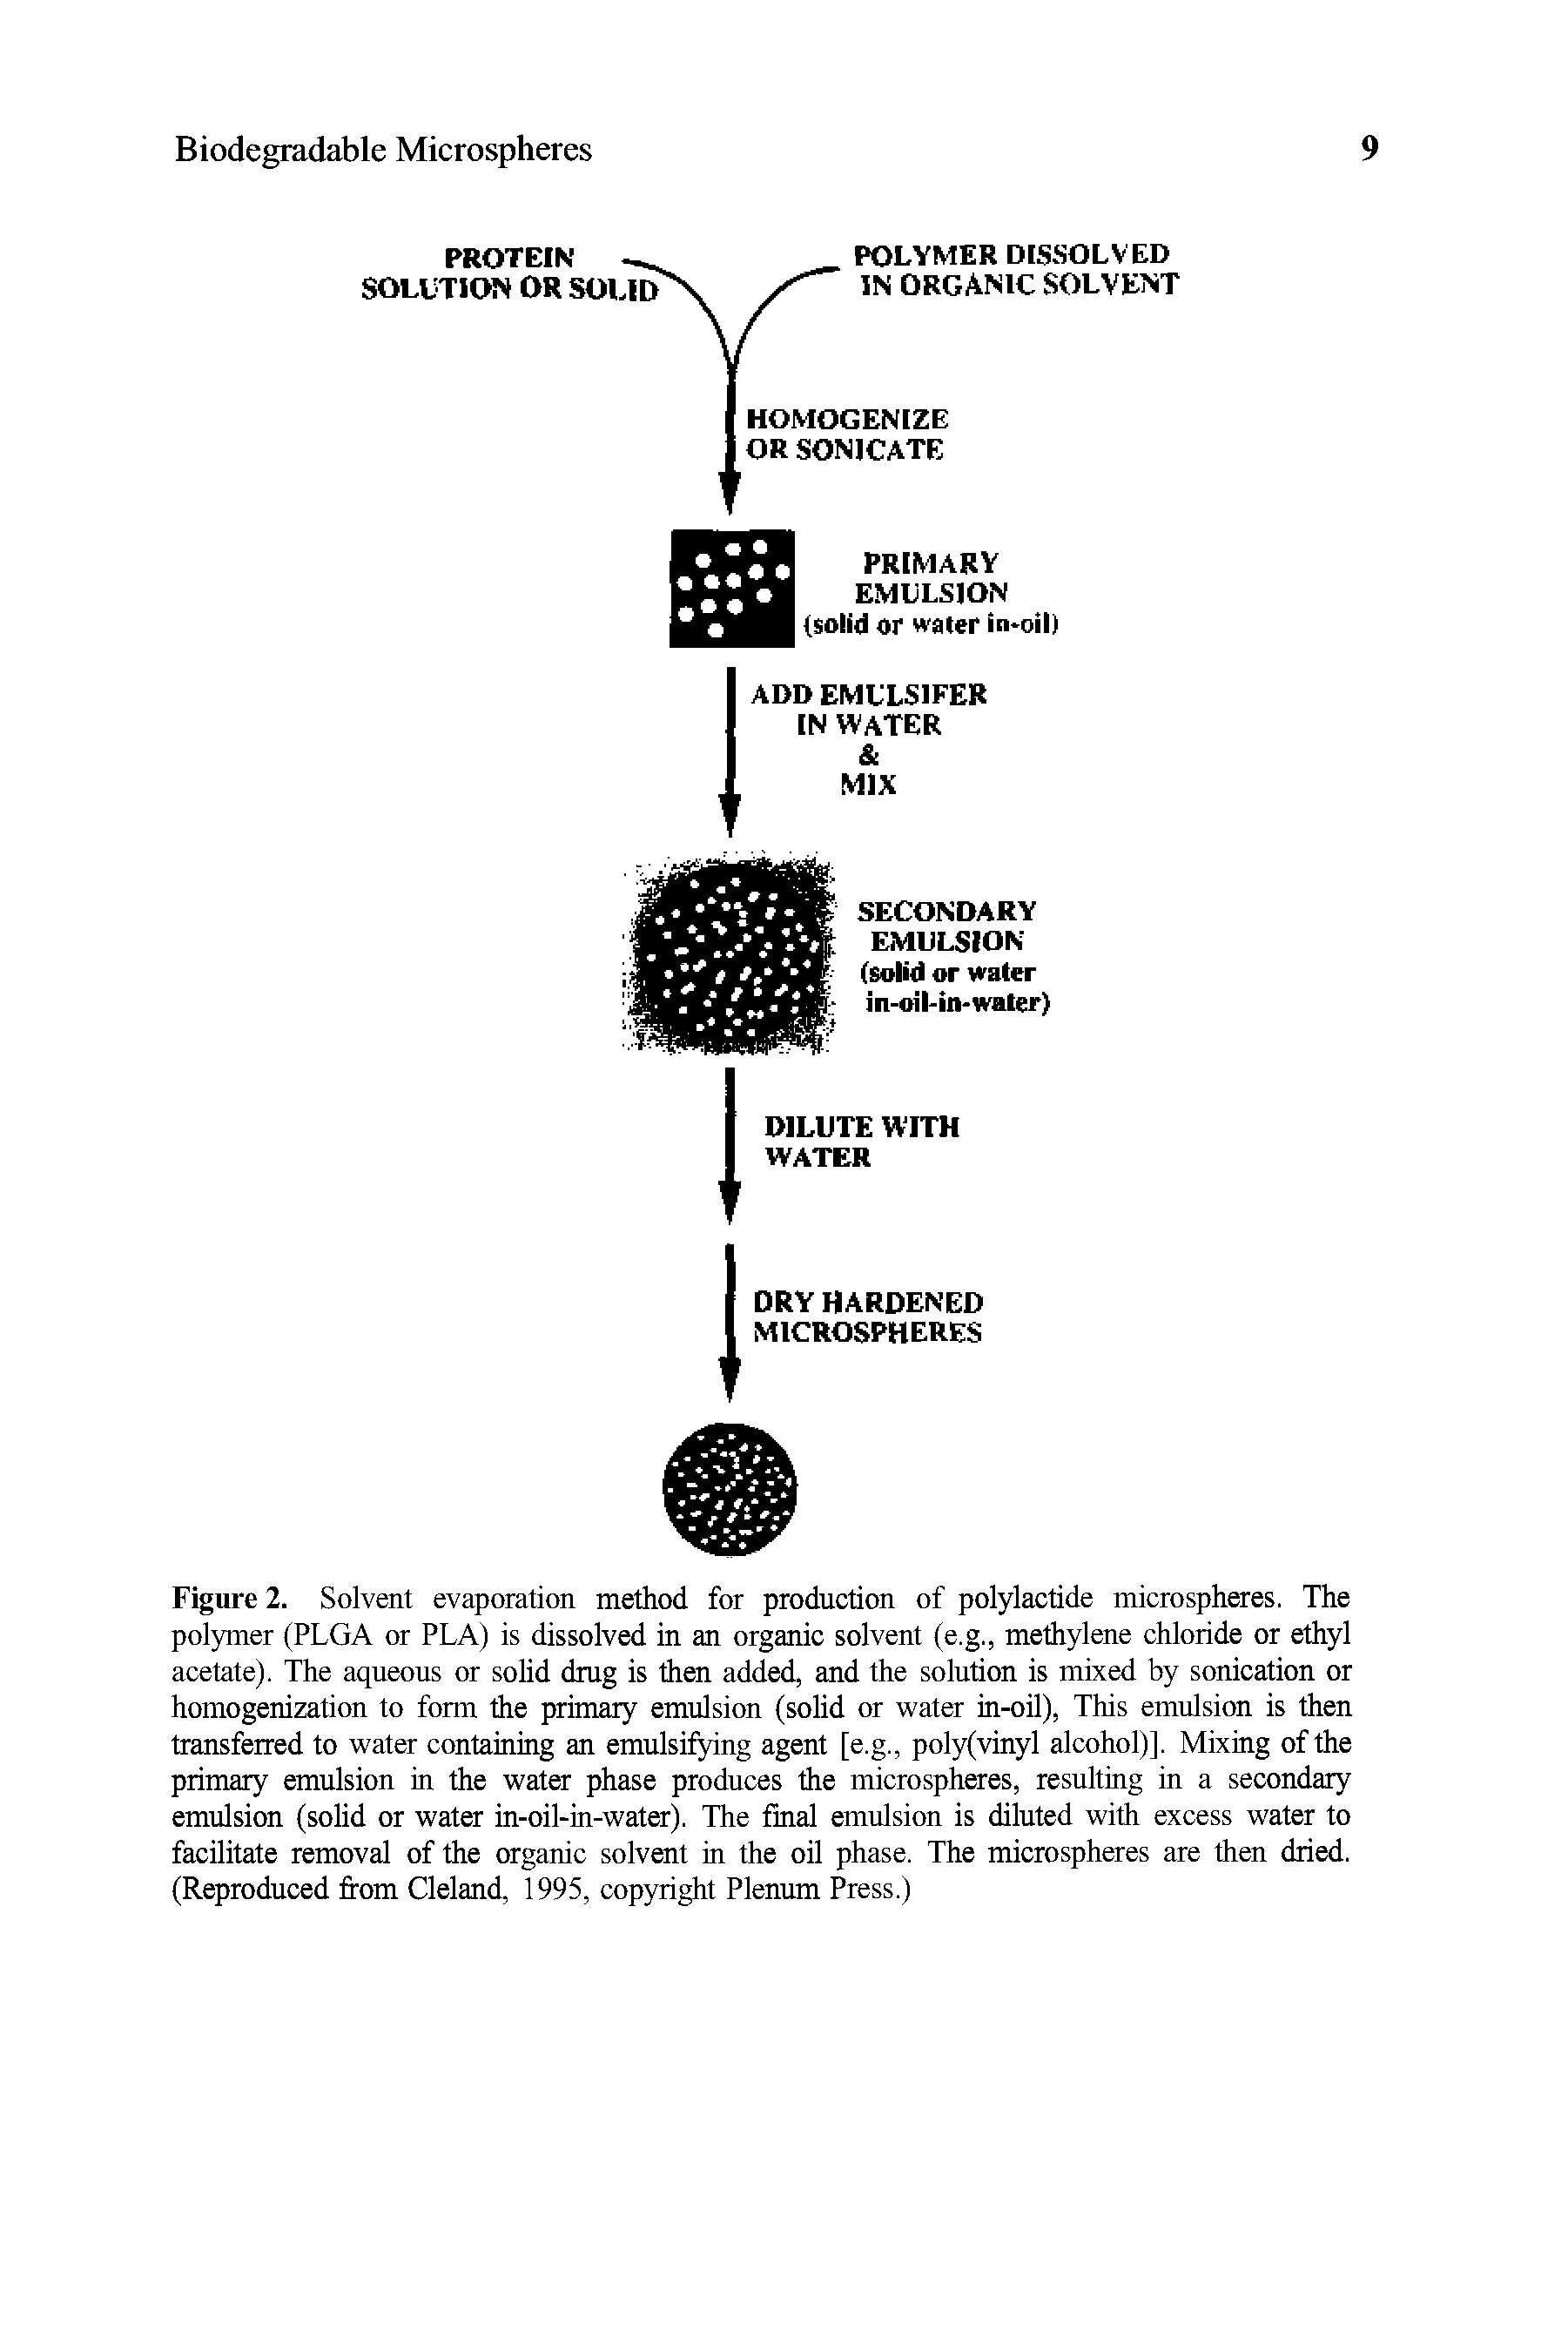 Figure 2. Solvent evaporation method for production of polylactide microspheres. The polymer (PLGA or PLA) is dissolved in an organic solvent (e.g., methylene chloride or ethyl acetate). The aqueous or solid dmg is then added, and the solution is mixed by sonication or homogenization to form the primary emulsion (solid or water in-oil), This emulsion is then transferred to water containing an emulsifying agent [e.g., poly(vinyl alcohol)]. Mixing of the primary emulsion in the water phase produces the microspheres, resulting in a secondary emulsion (solid or water in-oil-in-water). The final emulsion is diluted with excess water to facilitate removal of the organic solvent in the oil phase. The microspheres are then dried. (Reproduced om Cleland, 1995, cop)Tight Plenum Press.)...